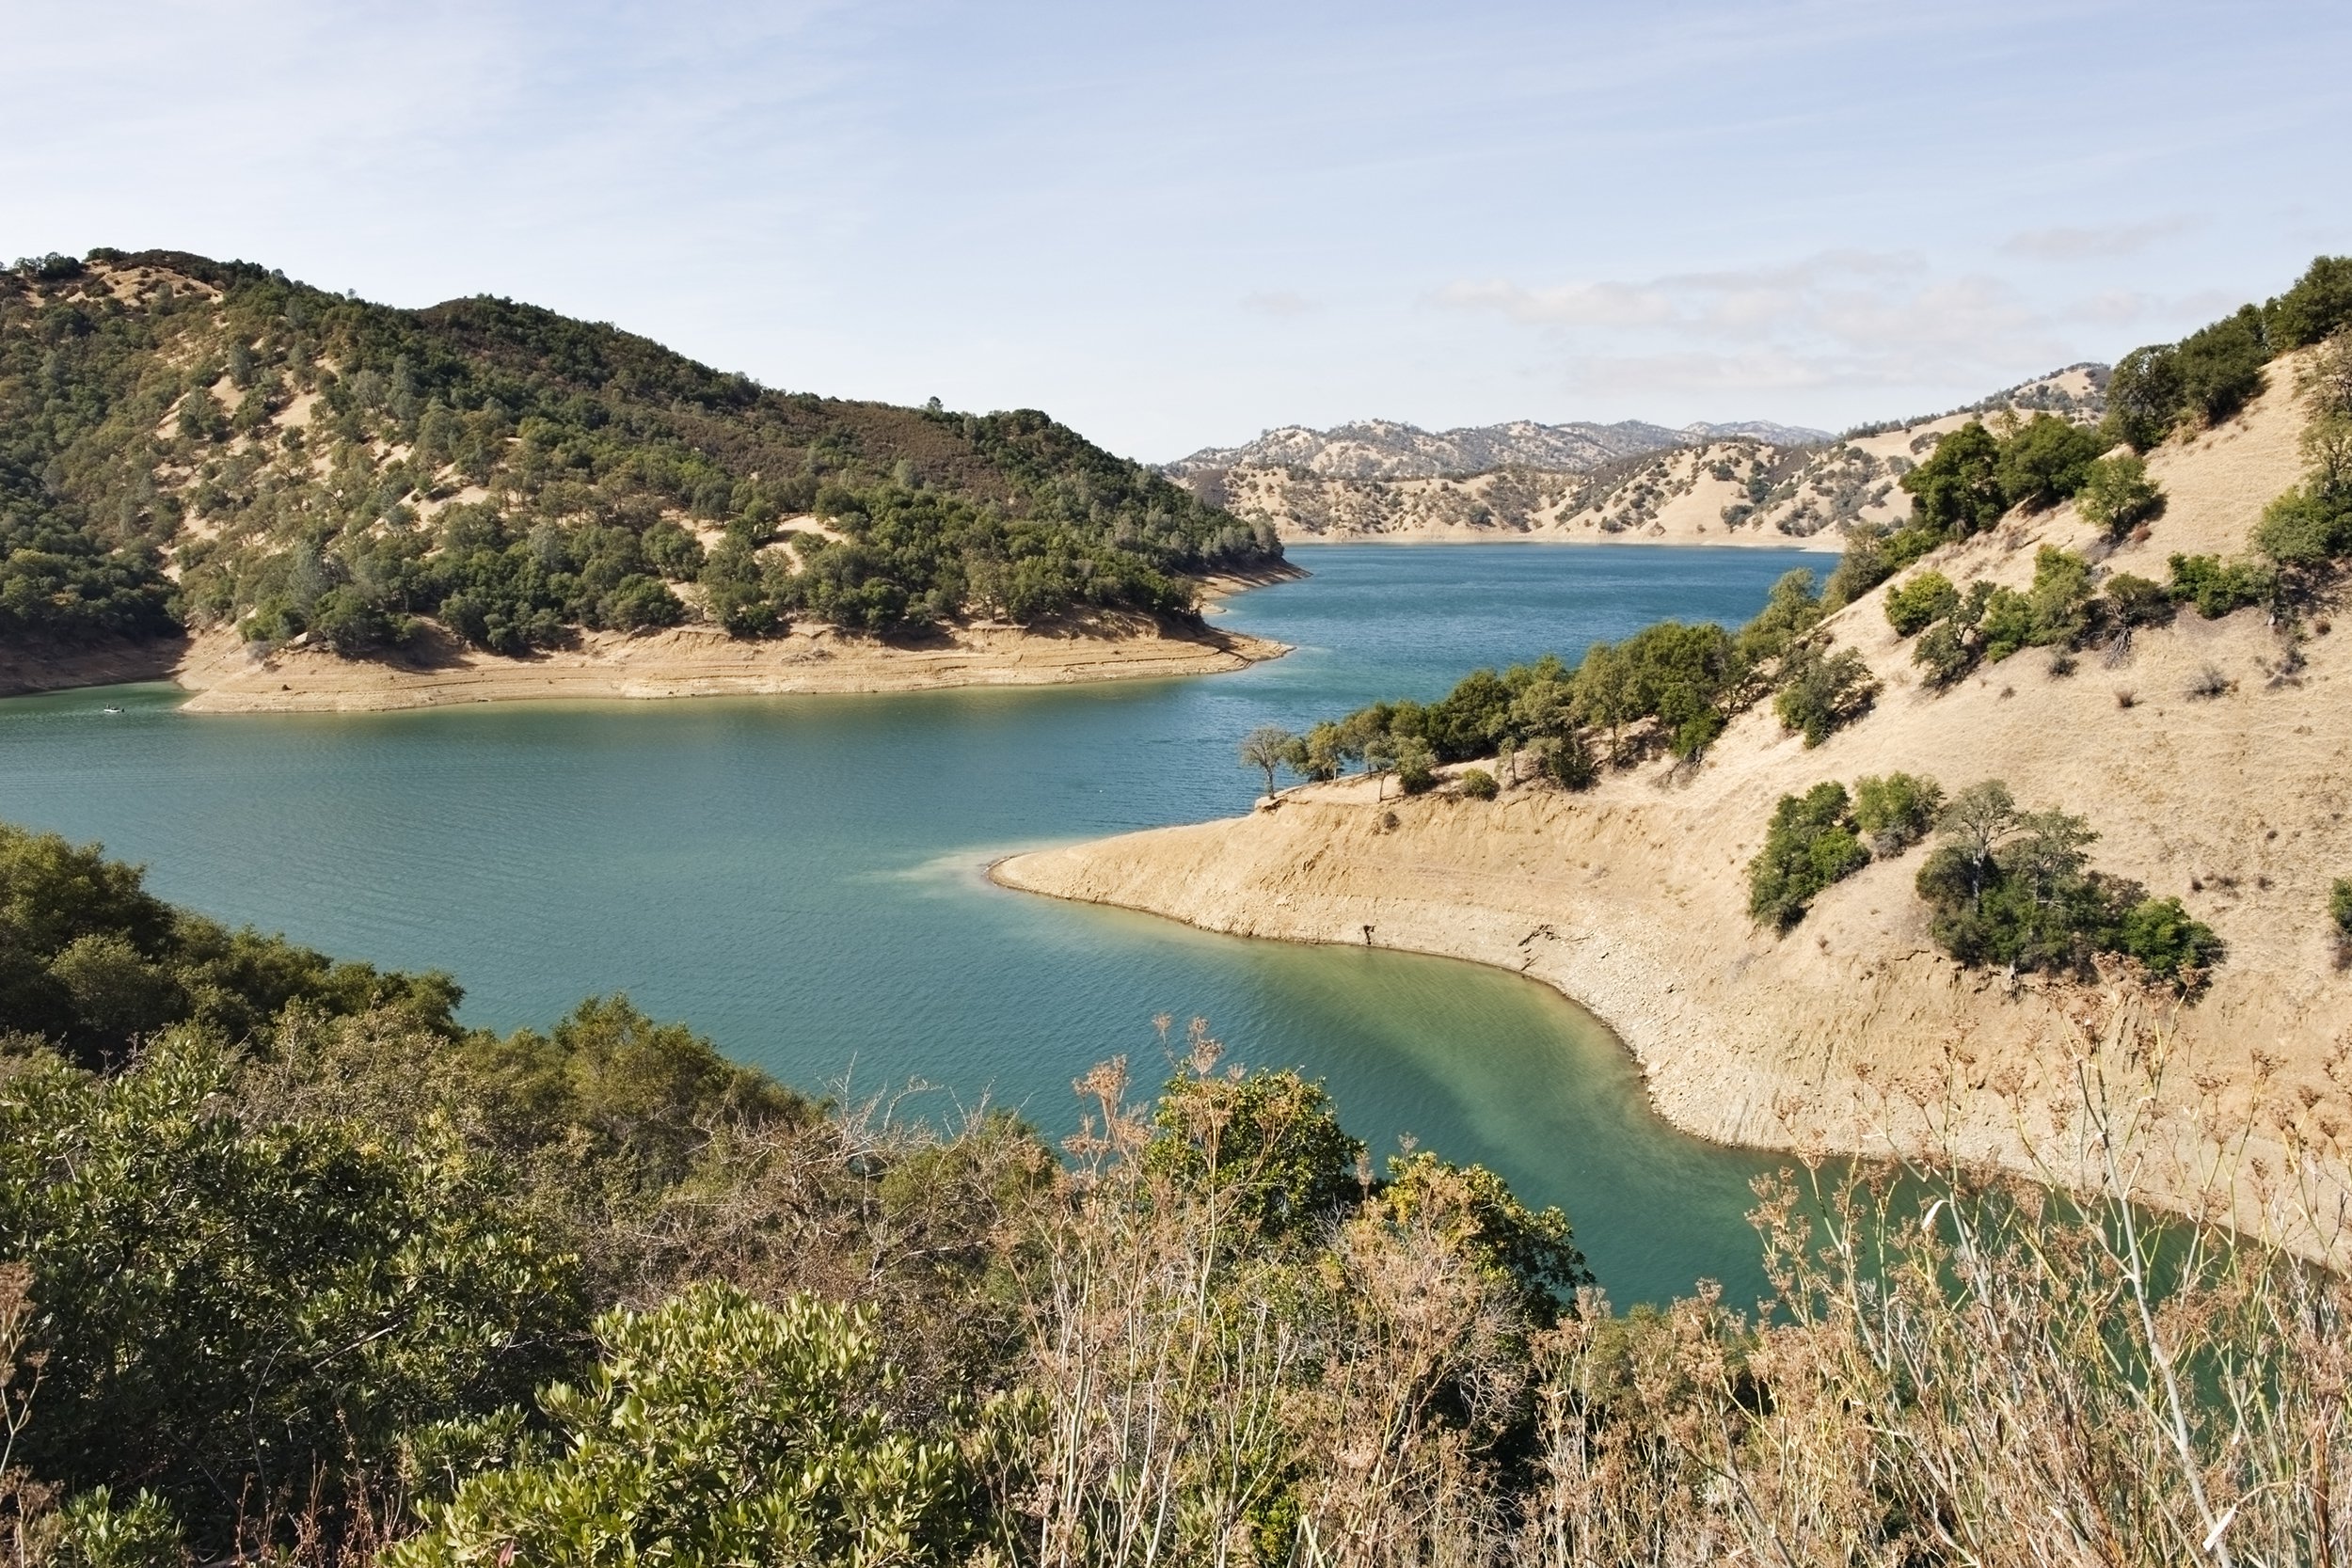 Steep mountains paint the background of <a href="https://churchillmanor.com/blog/2016/07/lake-berryessa-fishing/">Lake Berryessa</a>, which is located about an hour outside of Napa. Pick the right lures and you'll be in just the right spot to bring home dinner. Use chicken livers, nightcrawlers, salmon eggs or minnows for catfish, try silver spoons, salmon eggs or needlefish lures for trout and salmon, and crankbaits, zara spooks and plastic worms for bass.